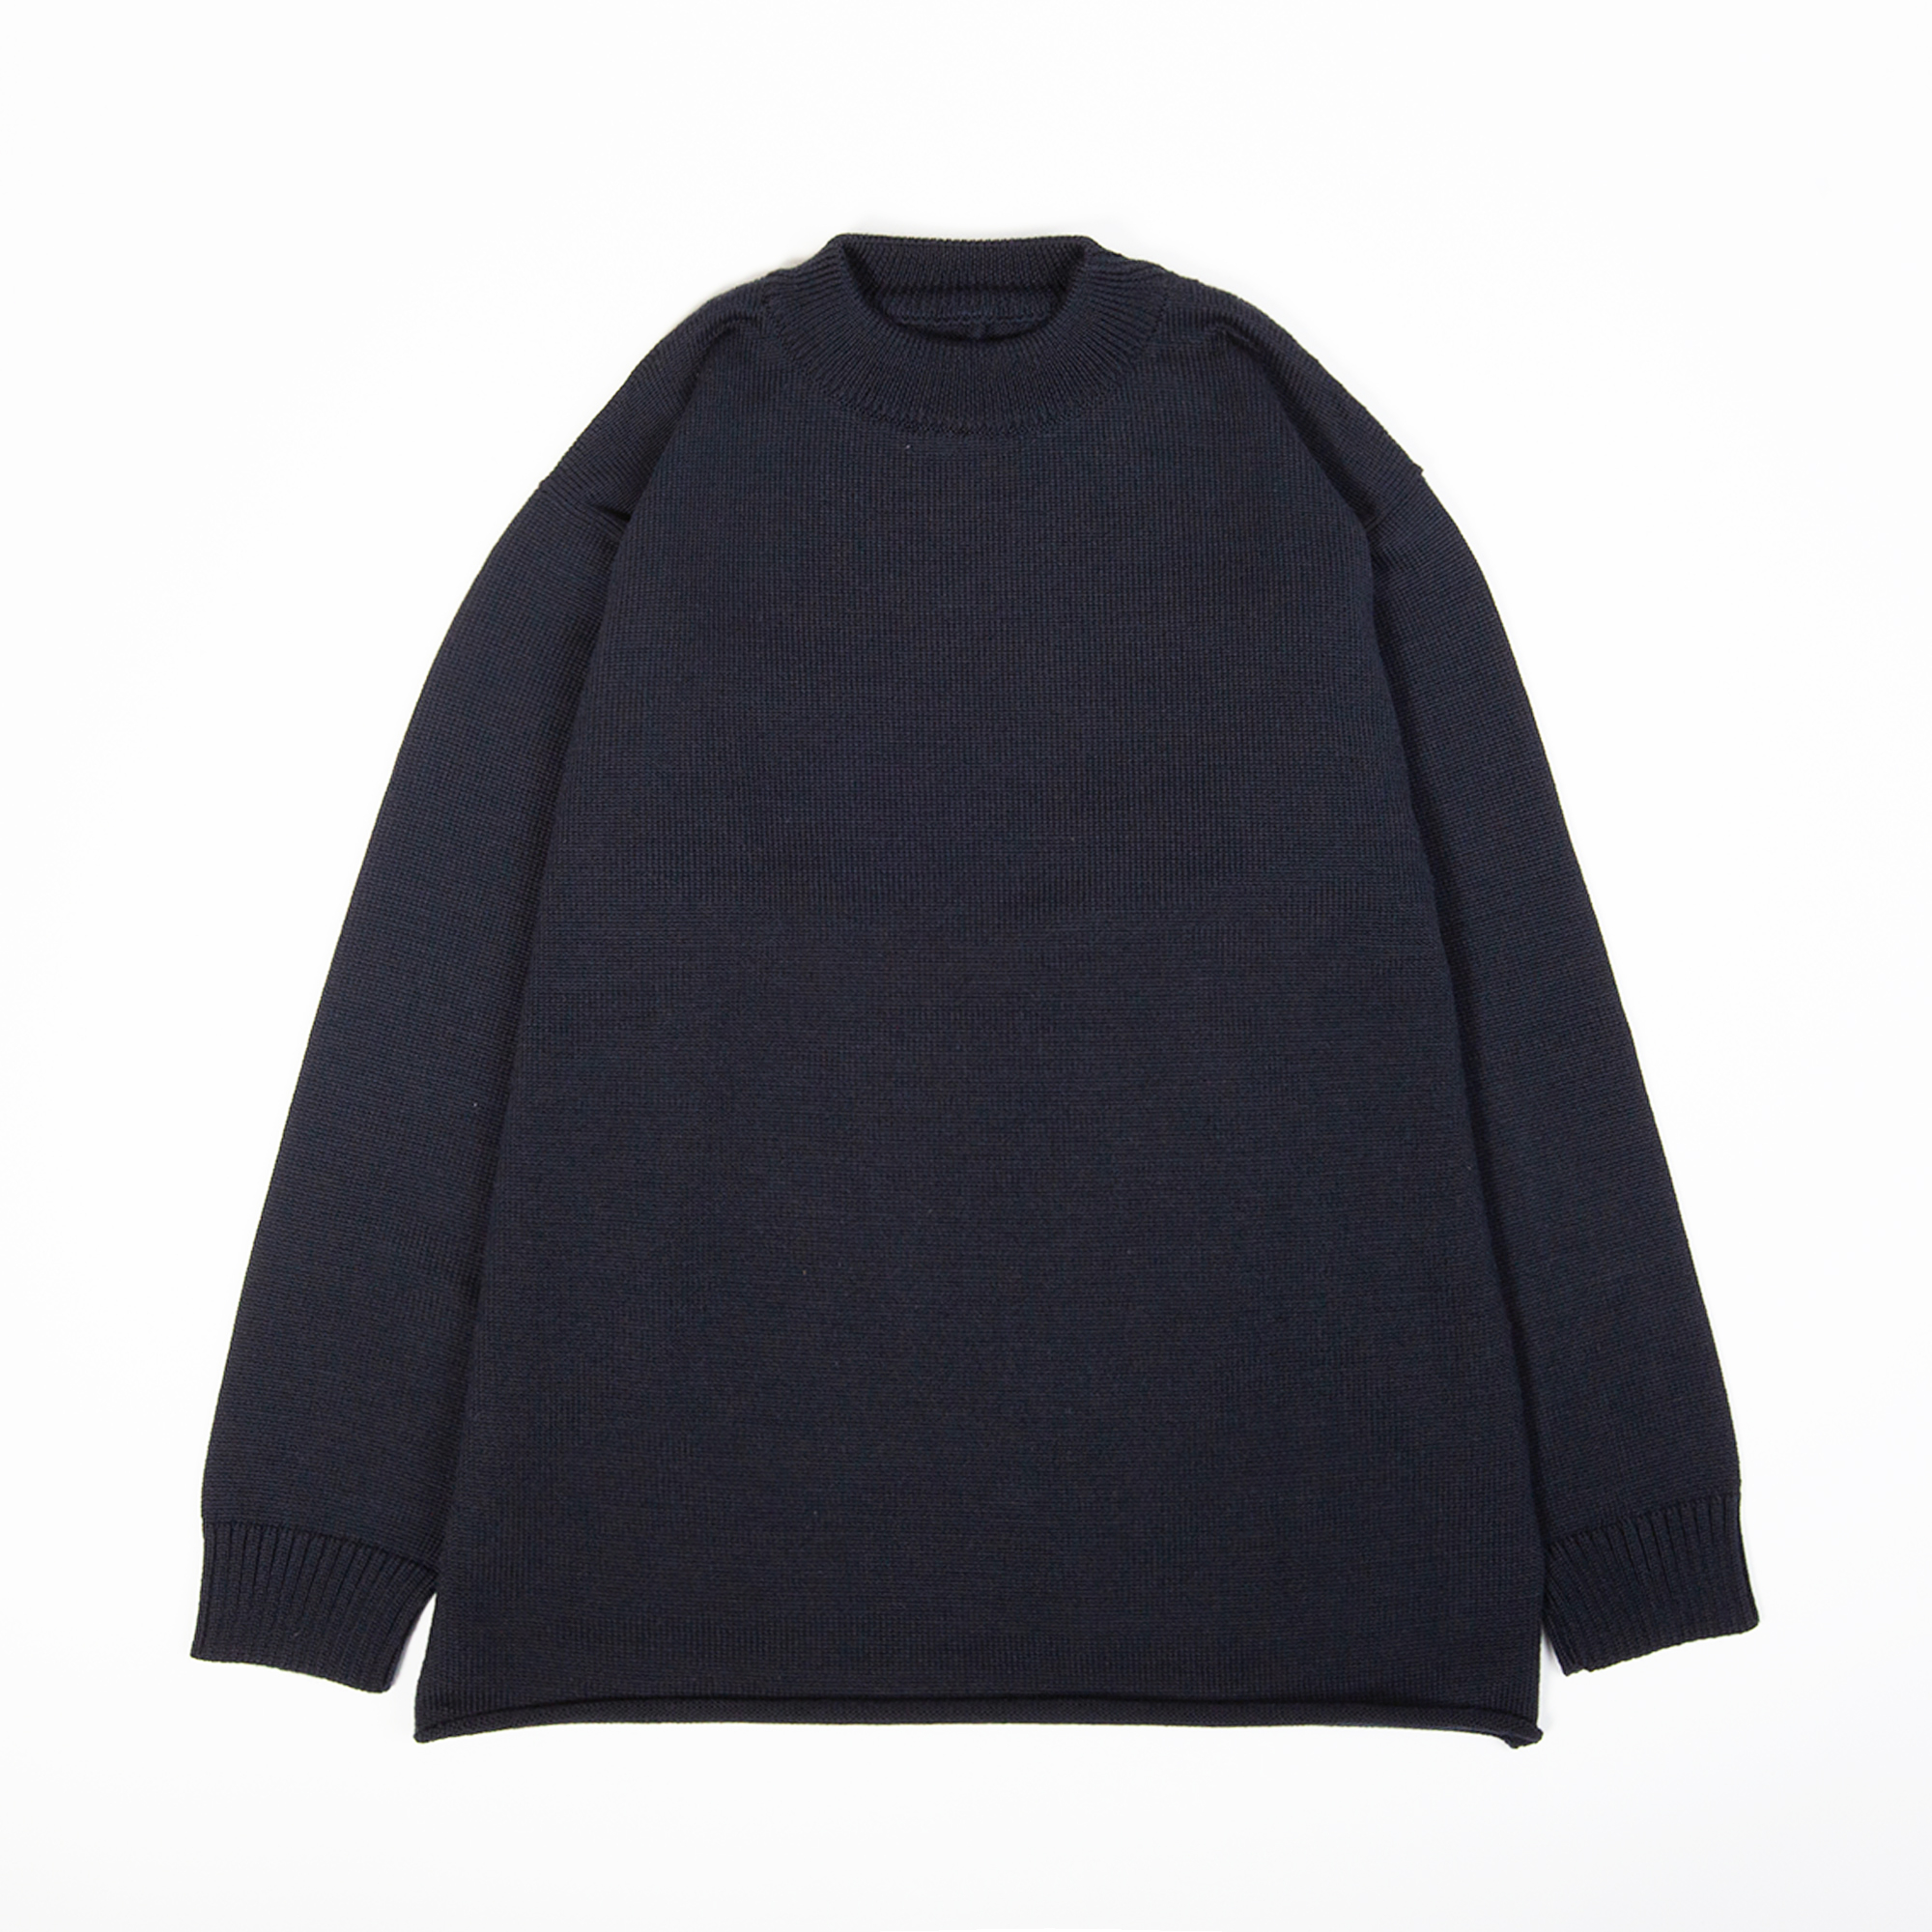 DYCE sweater in Midnight color by Arpenteur